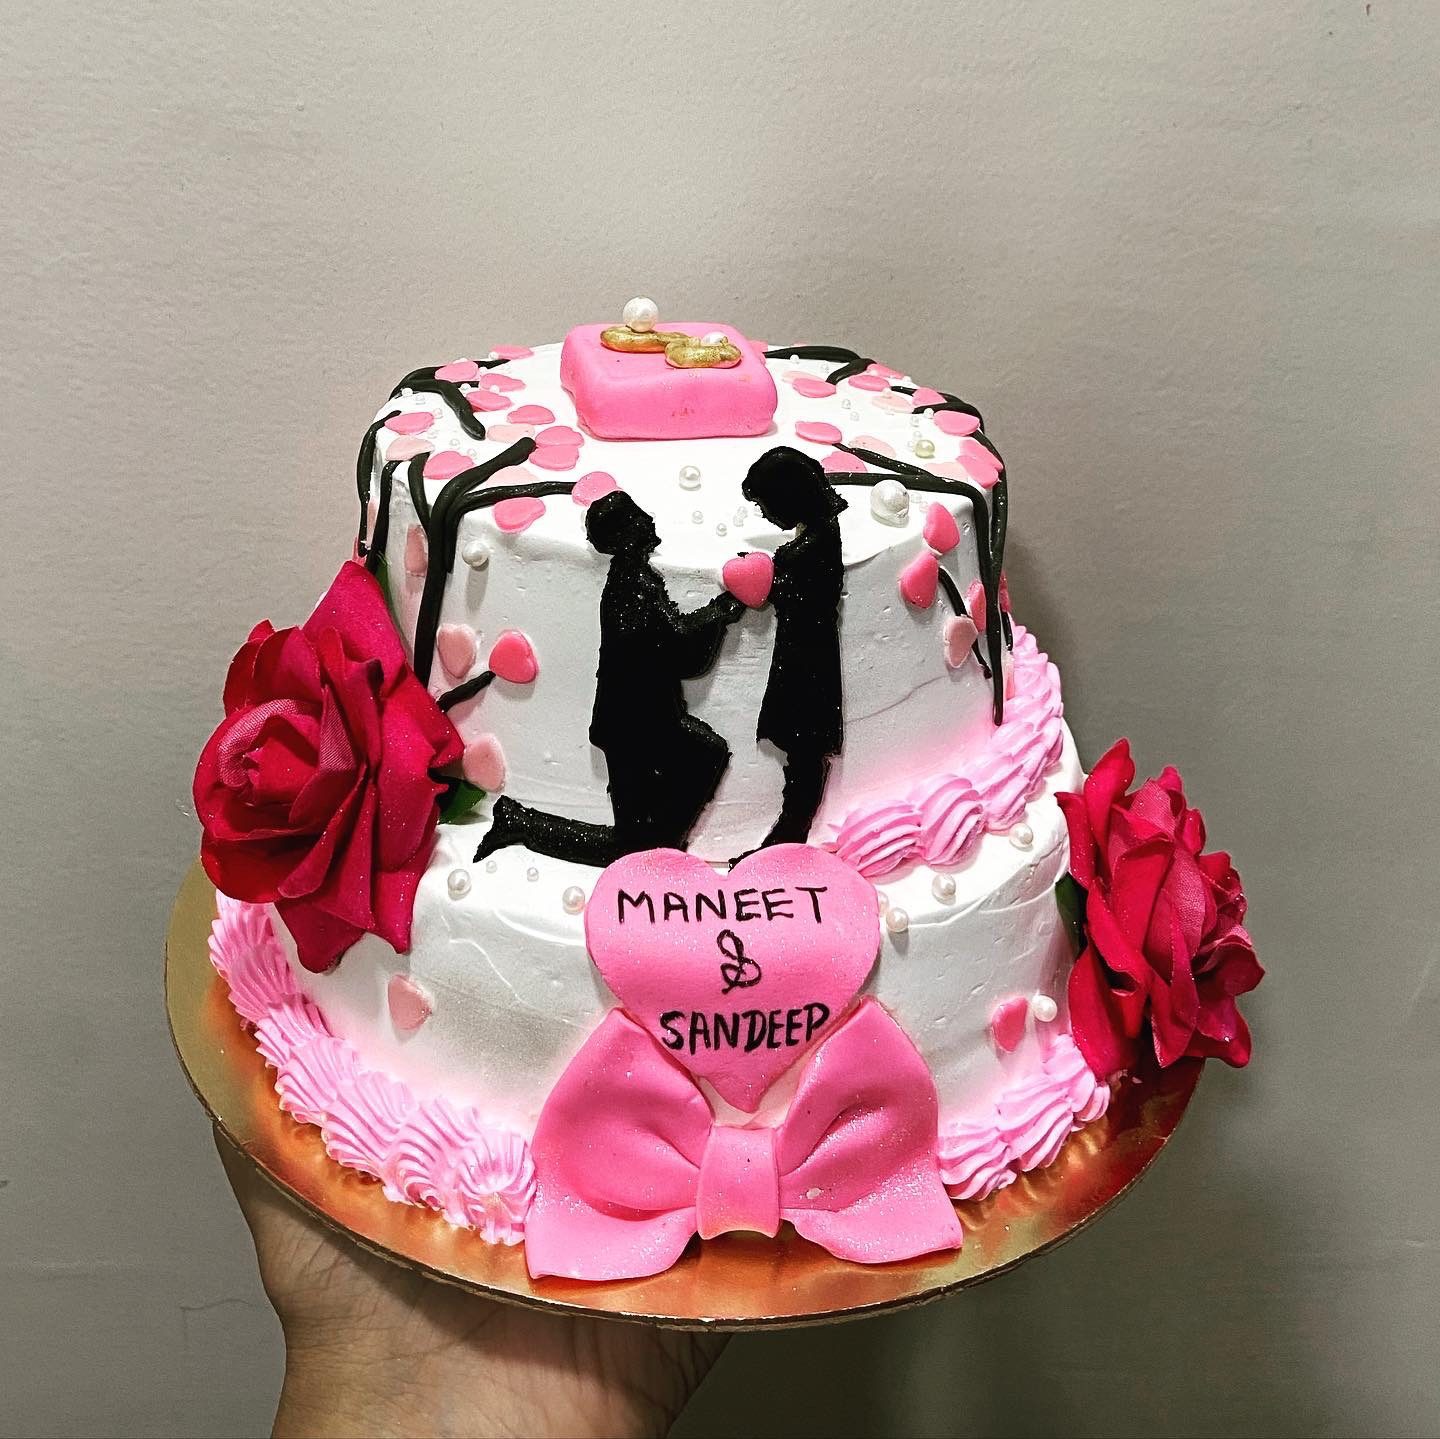 3 Kg Engagement Cake in Kidderpore, Kolkata | Delivery Date: 9 October 2022 Designs, Images, Price Near Me